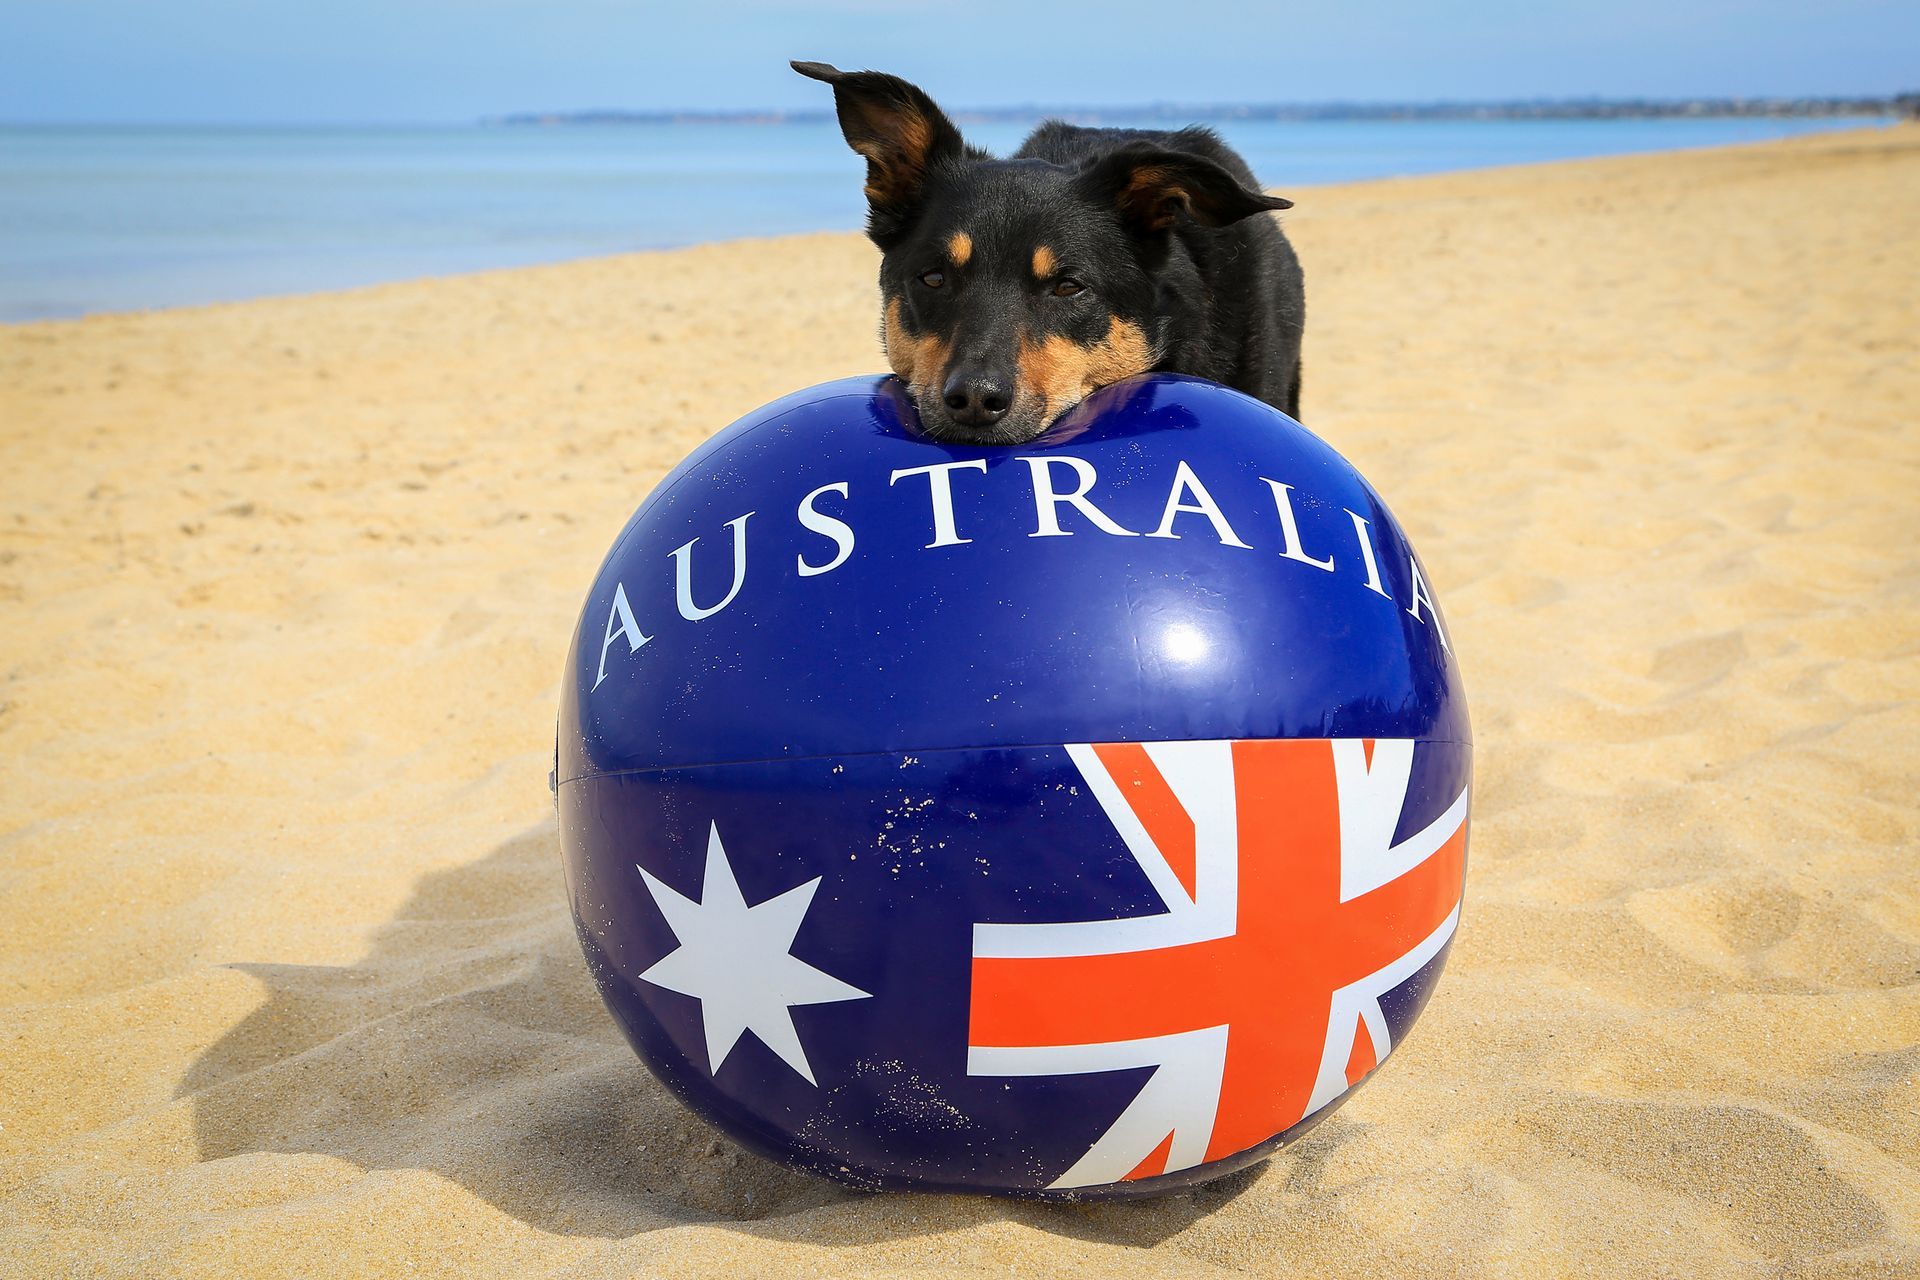 A dog is sitting on top of an inflatable ball that says australia